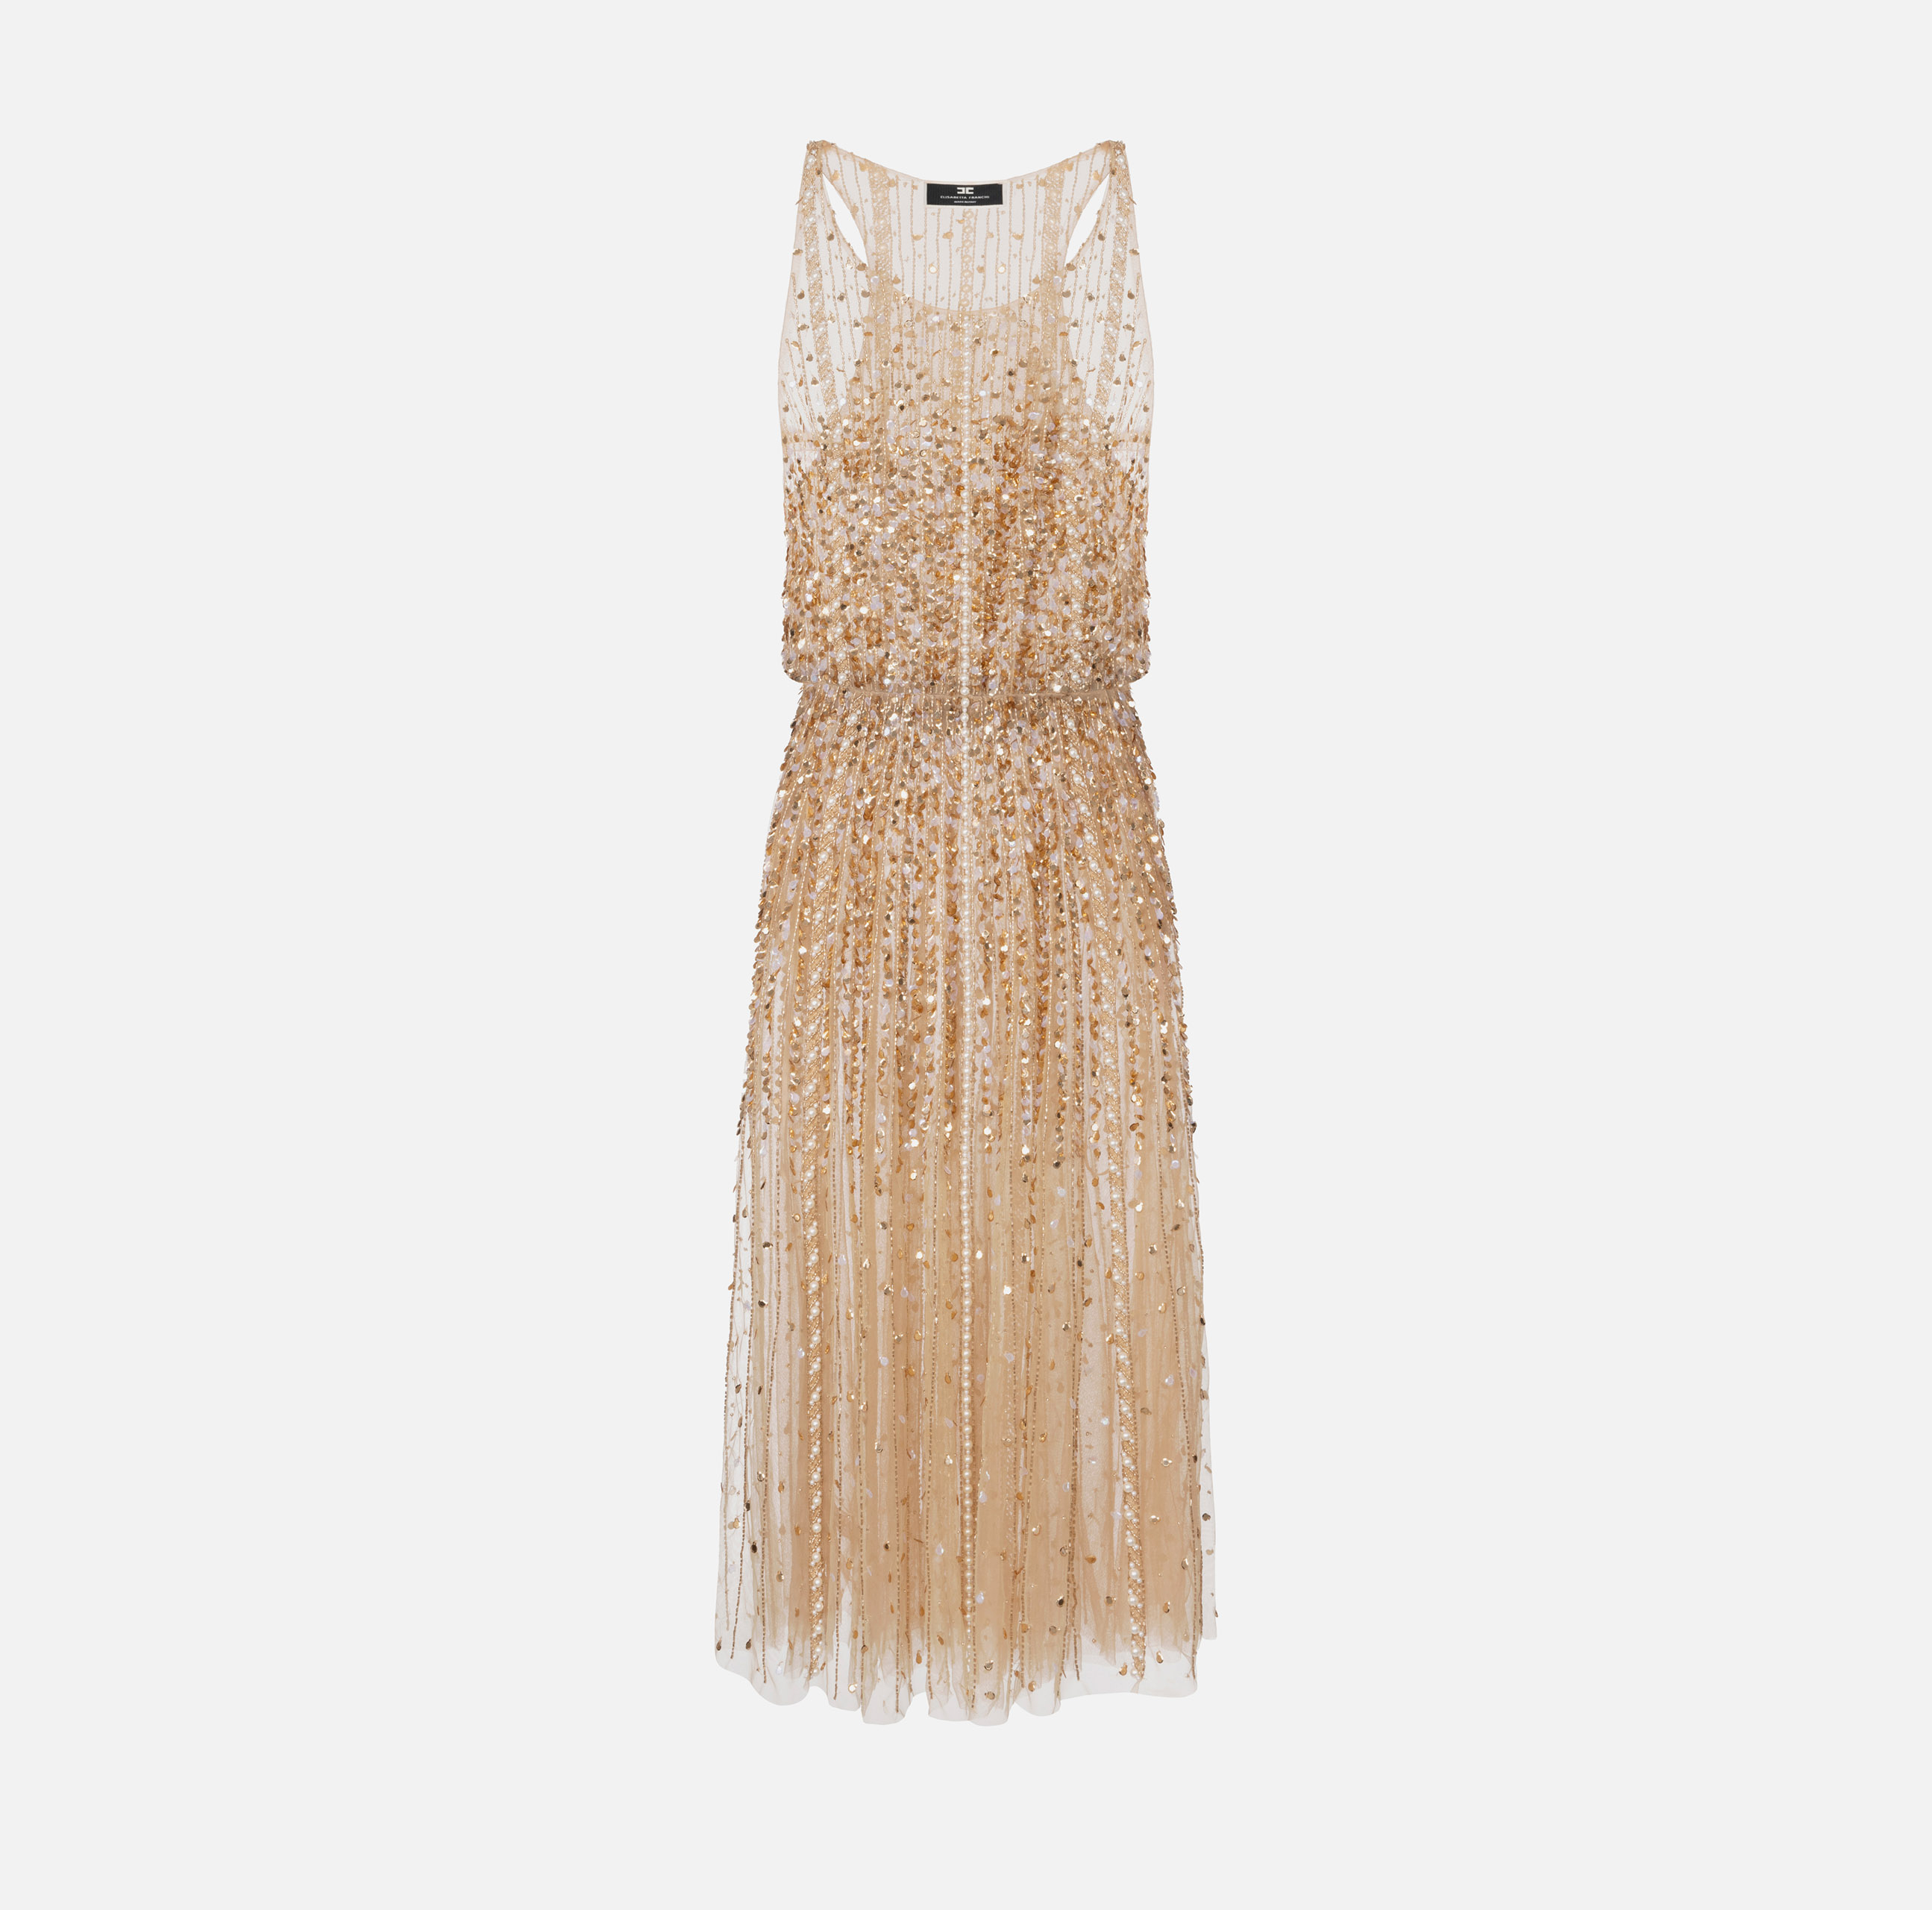 Midi dress in embroidered tulle fabric - Elisabetta Franchi